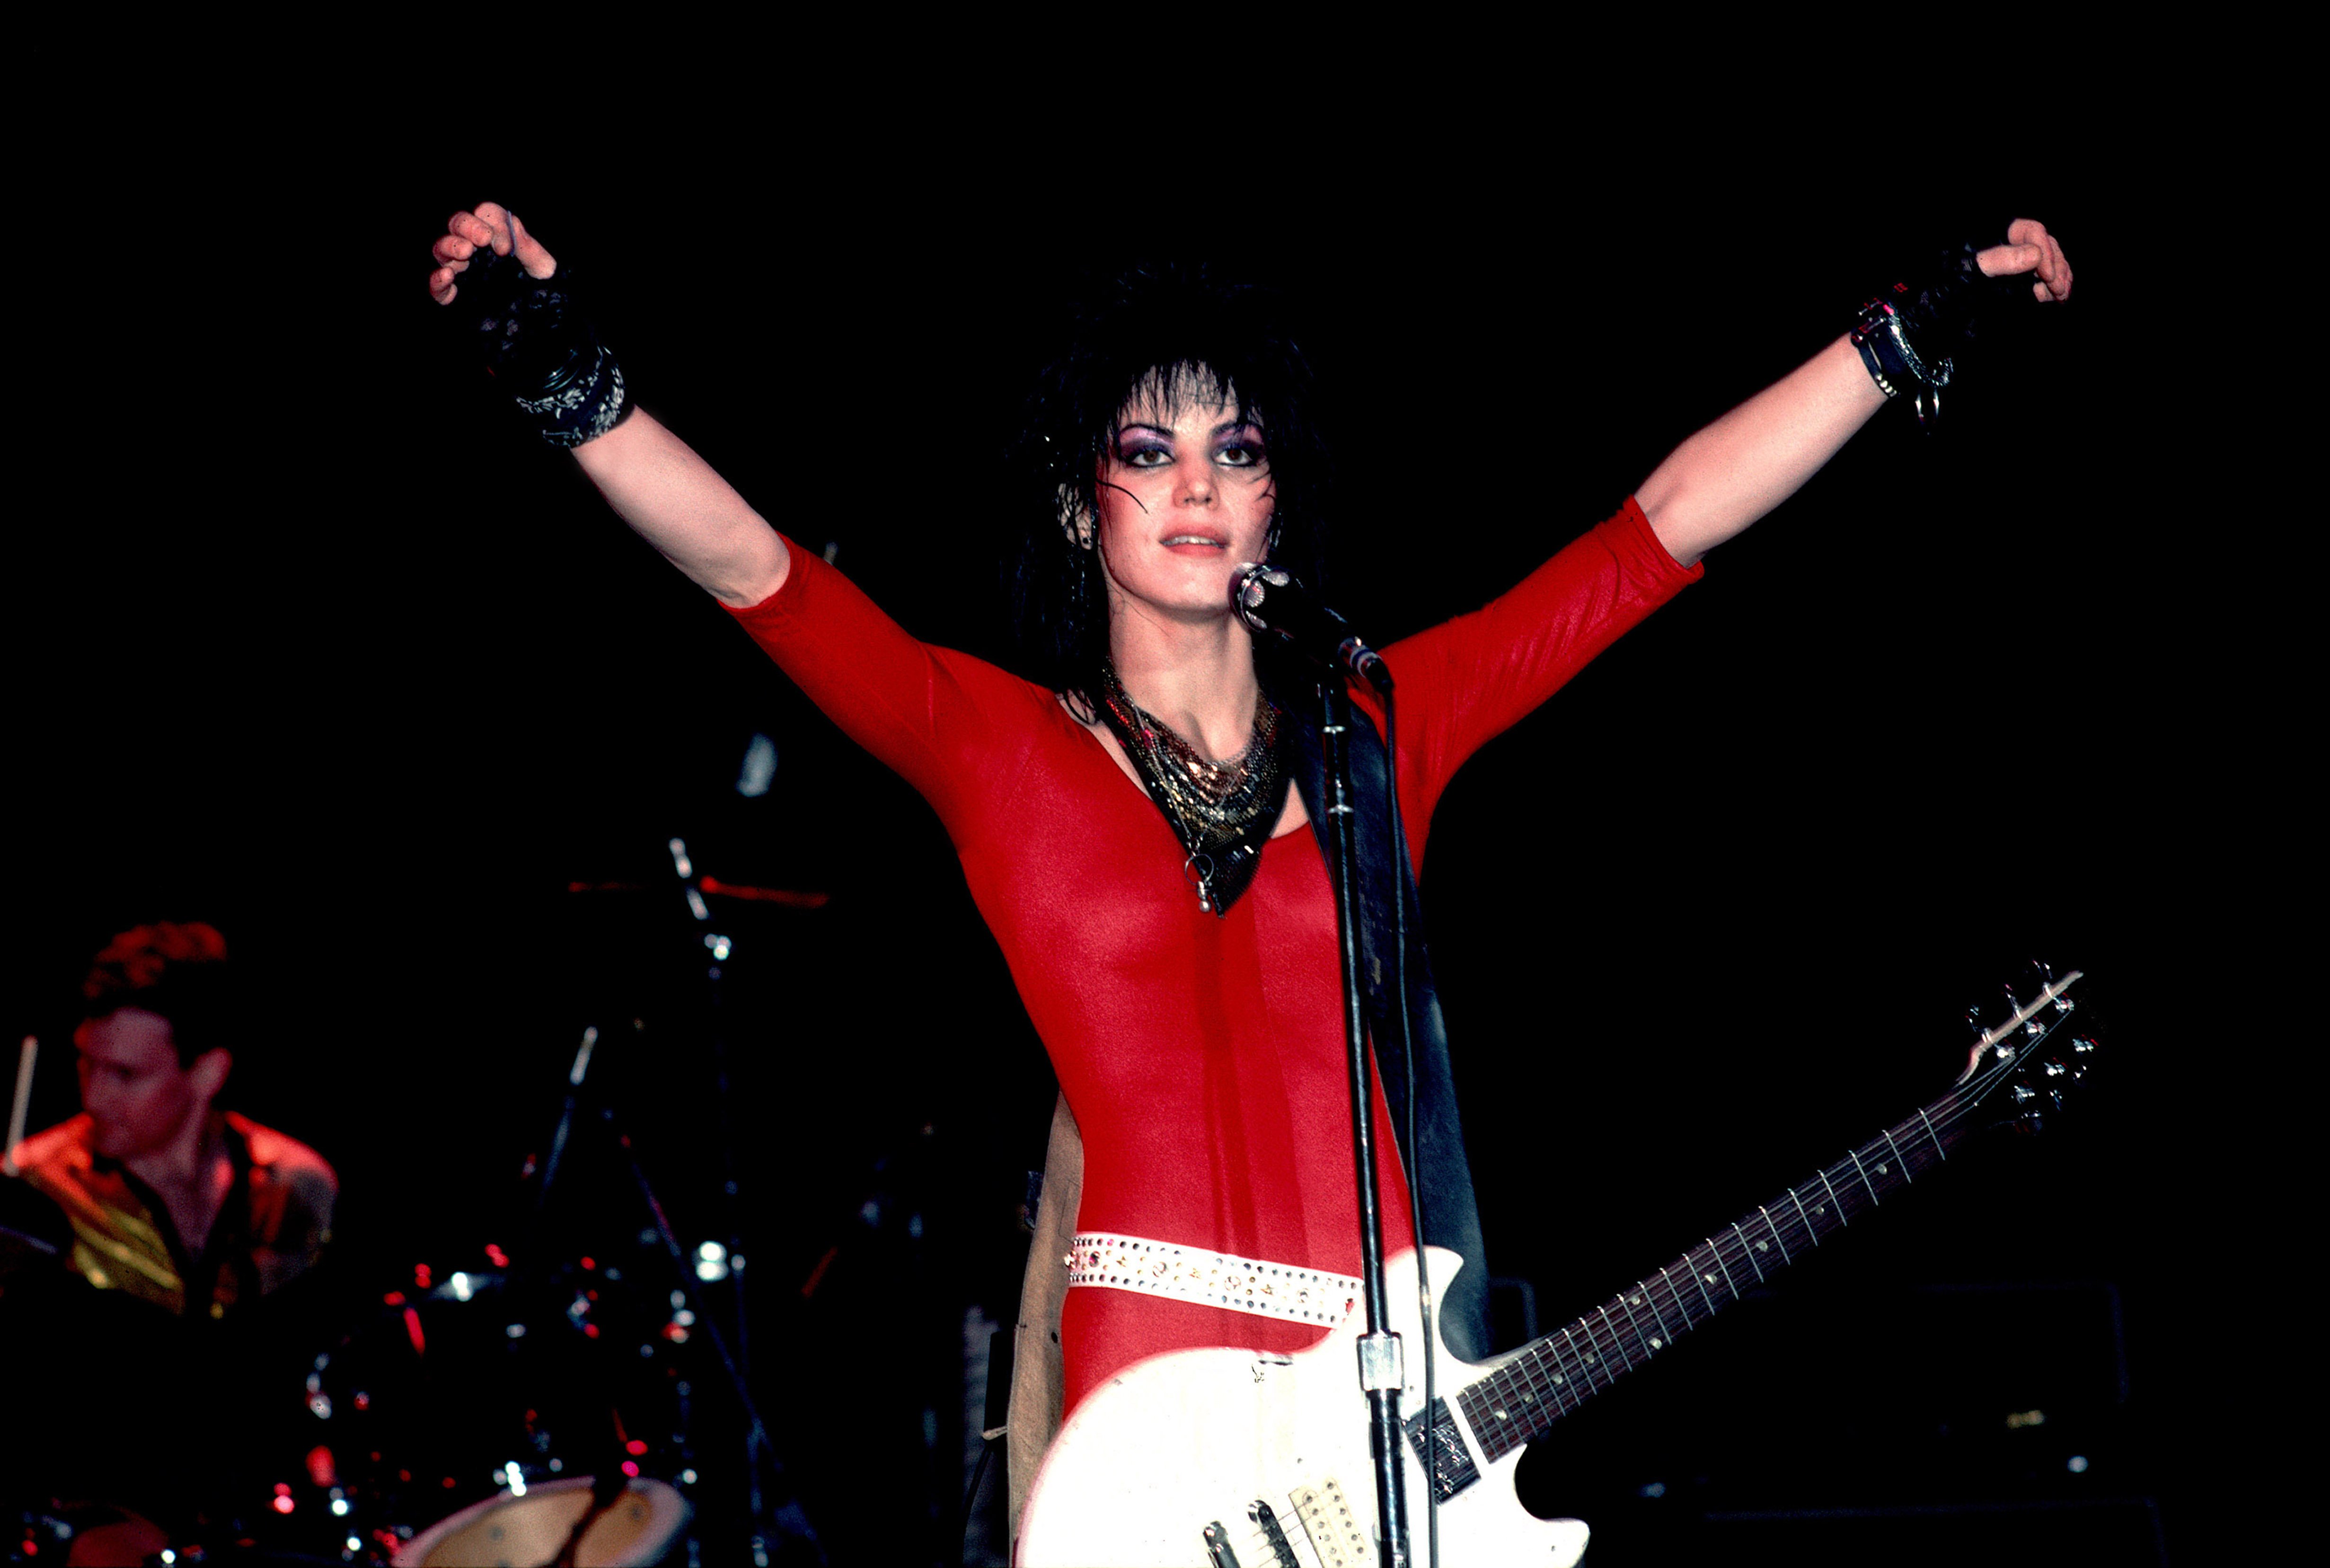 Joan Jett pictured during her performance at the Holiday Star Theater, Chicago, Illinois, March 27, 1985 | Source: Getty Images